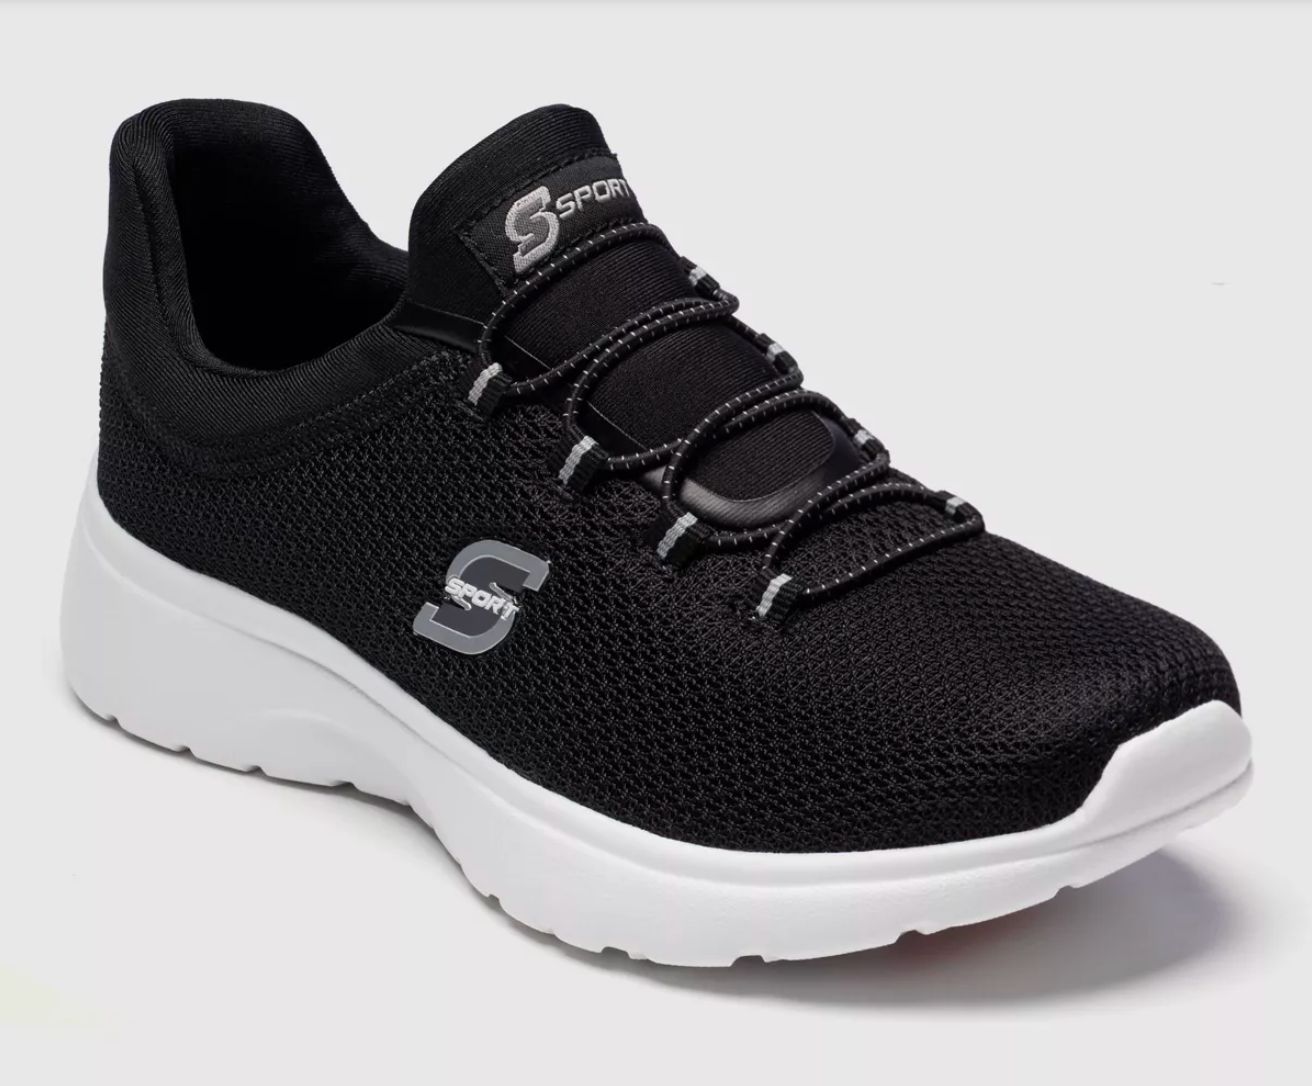 A black and white Sketchers sneaker